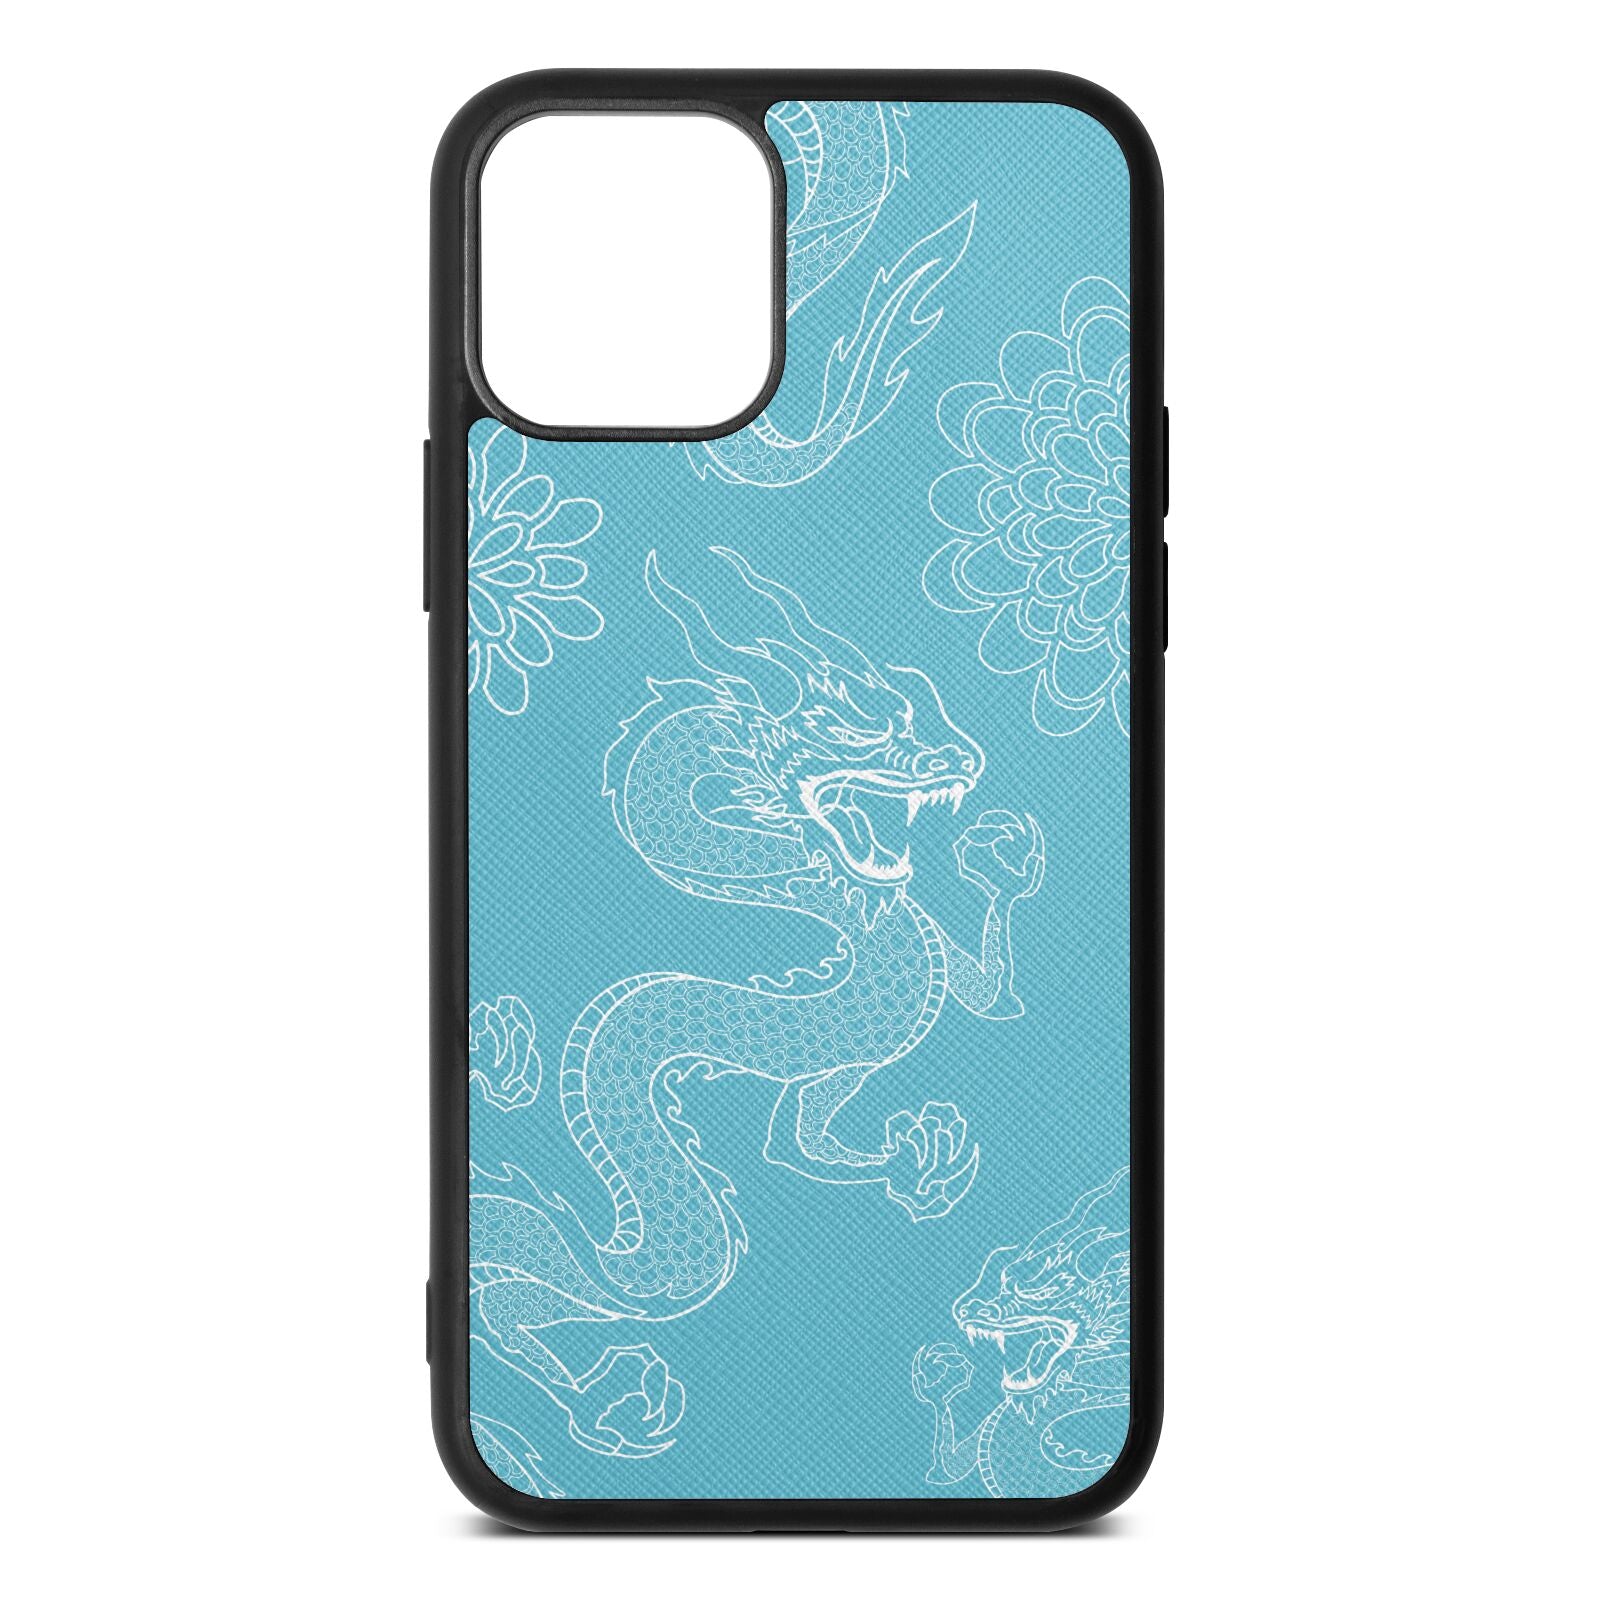 Dragons Sky Saffiano Leather iPhone 11 Case